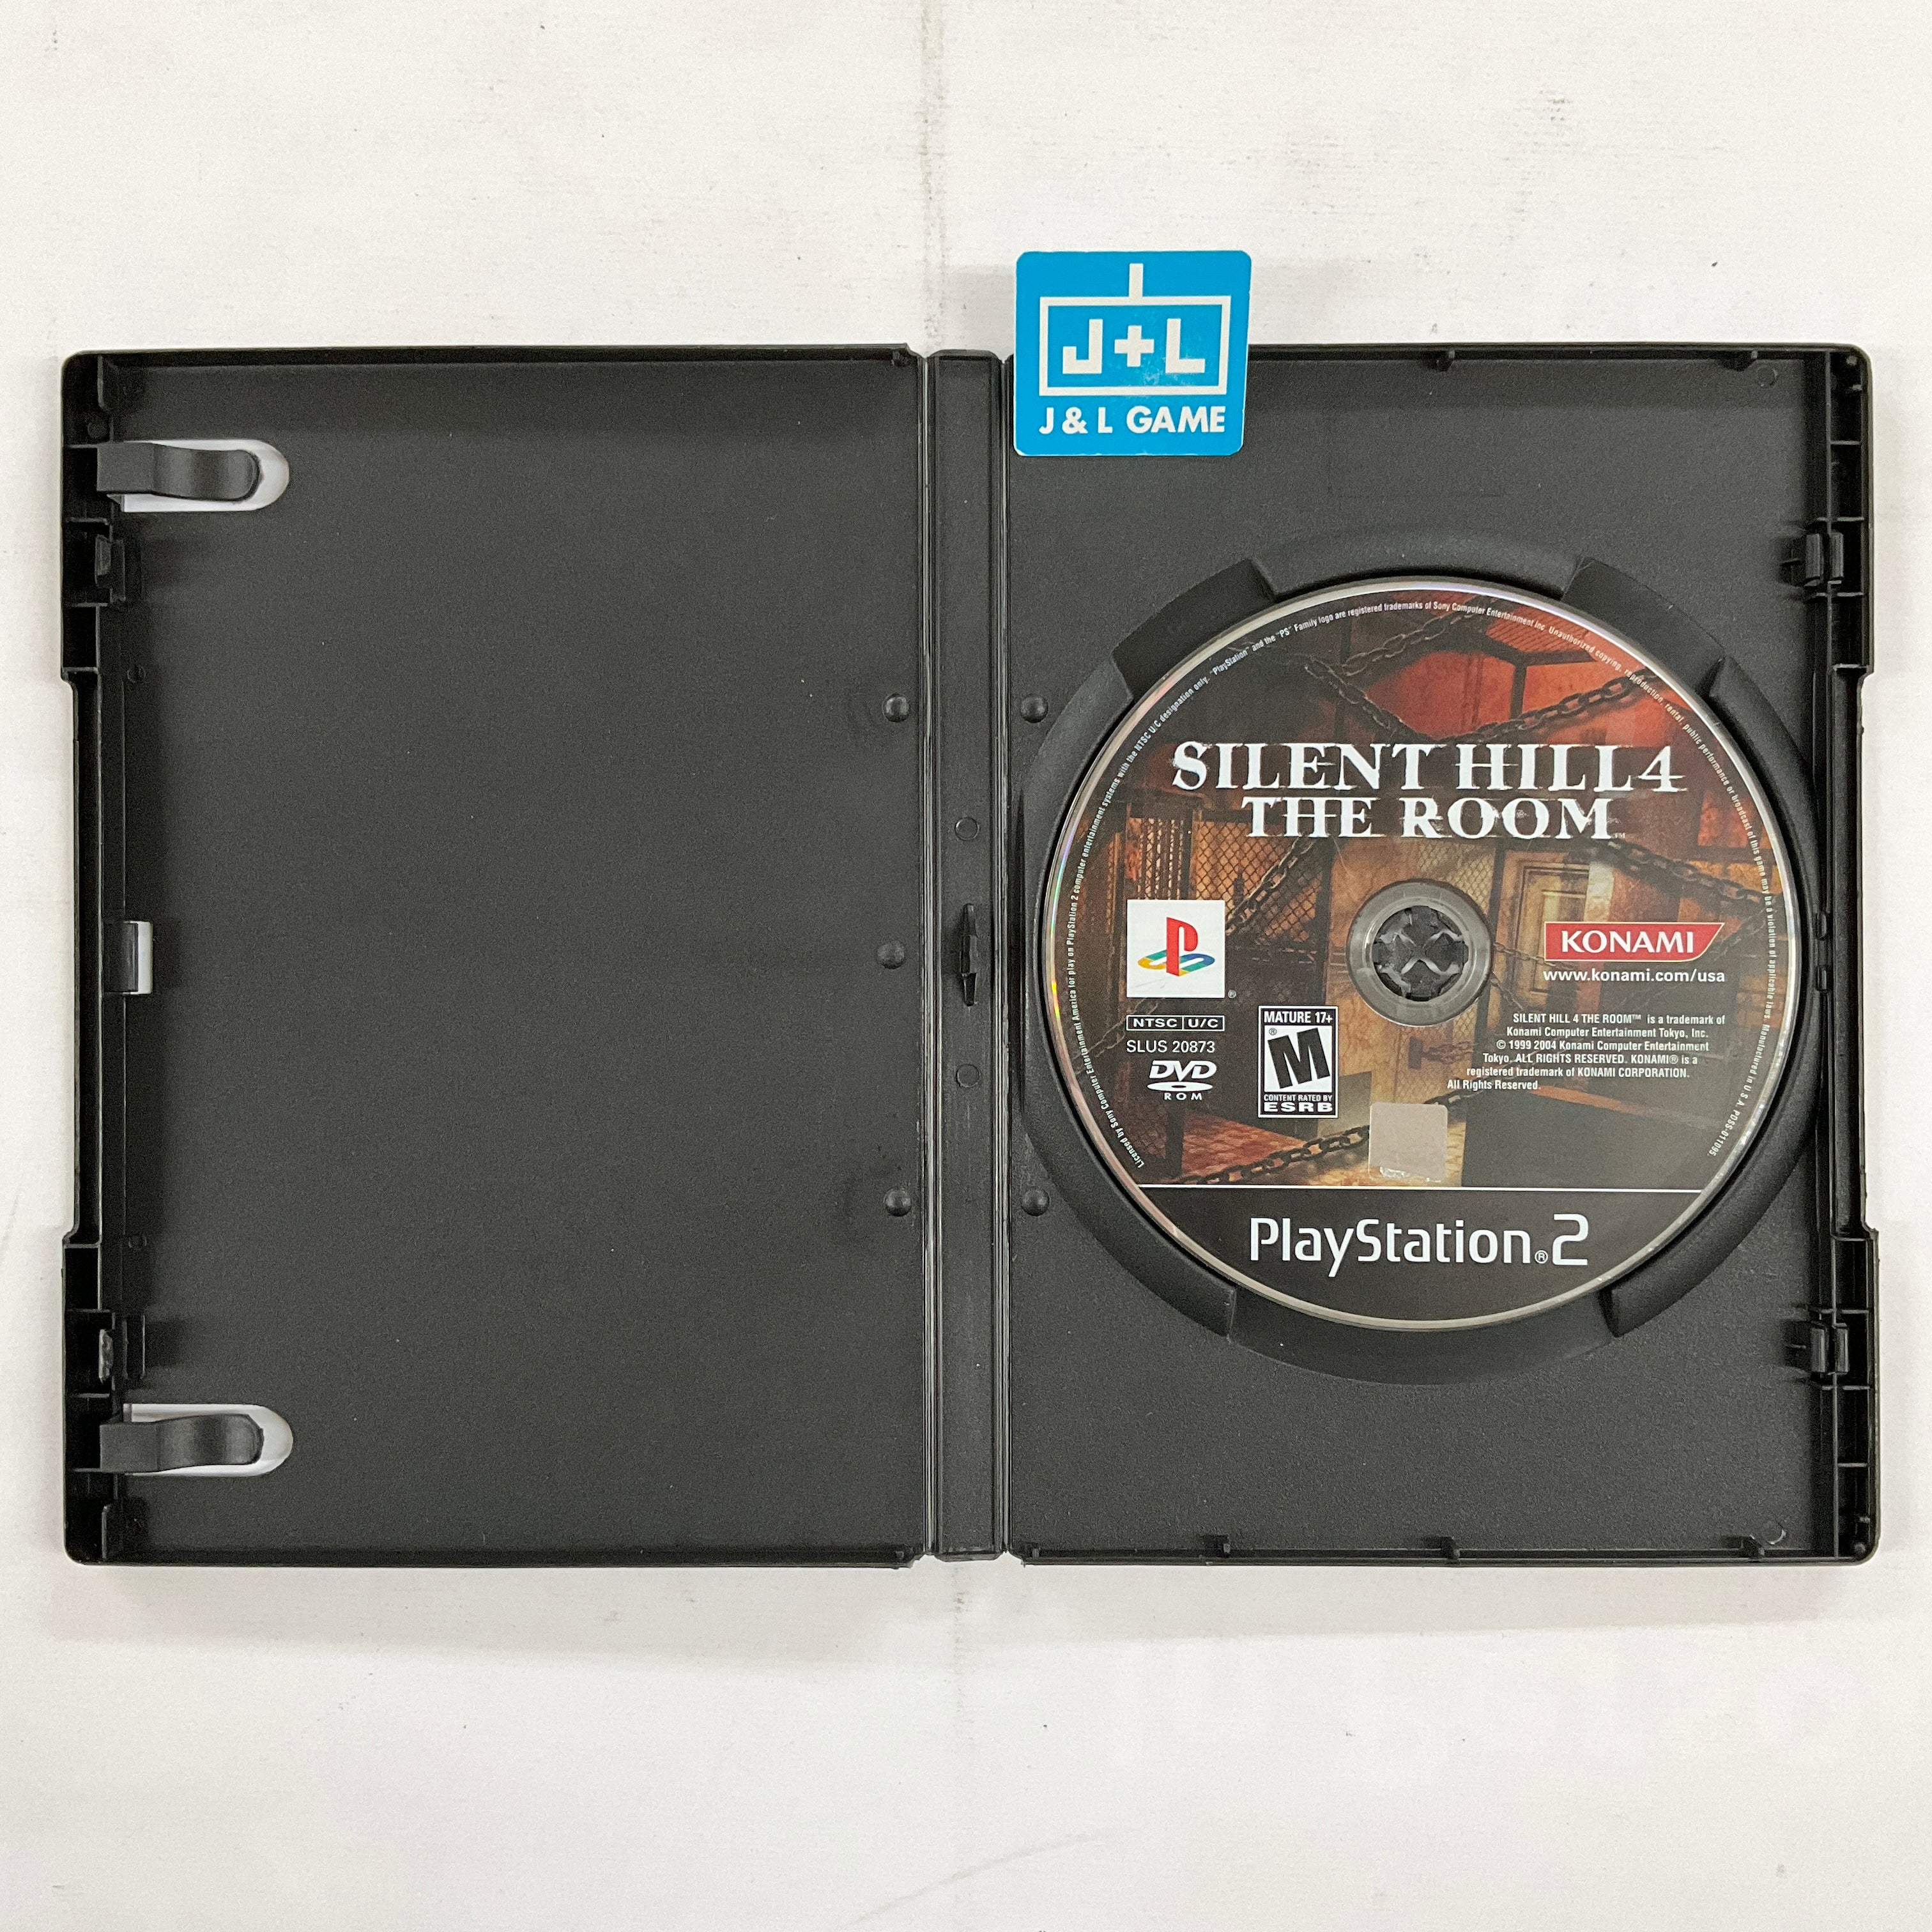 Silent Hill 4: The Room  - (PS2) PlayStation 2 [Pre-Owned] Video Games Konami   